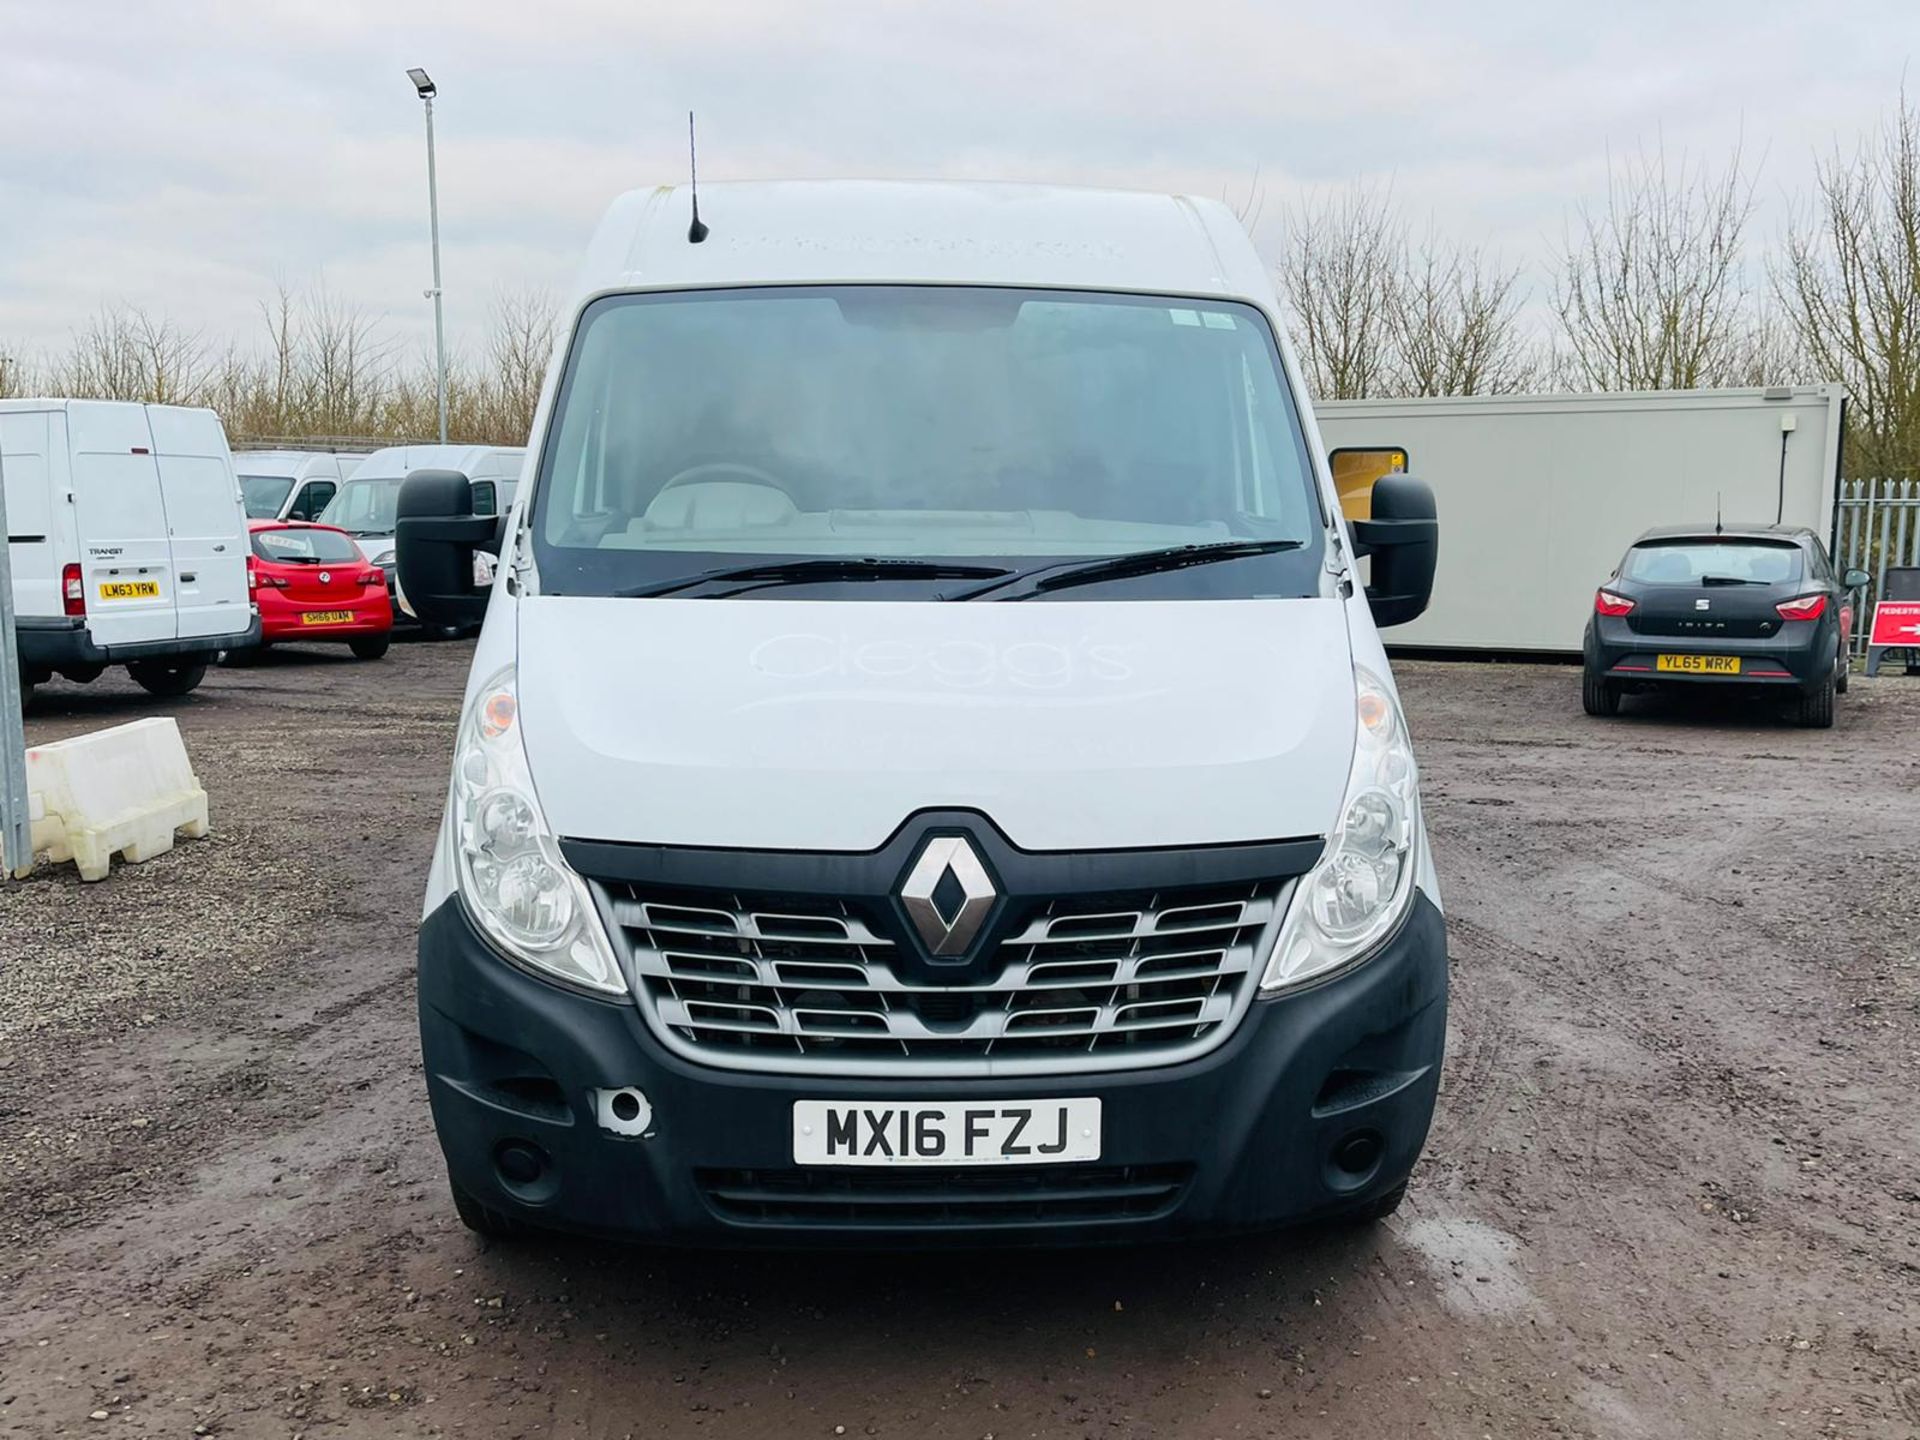 Renault Master 2.3 DCI 110 Business LM35 L3 H2 2016 '16 reg' Fridge/Freezer - Fully Insulated - Image 4 of 23